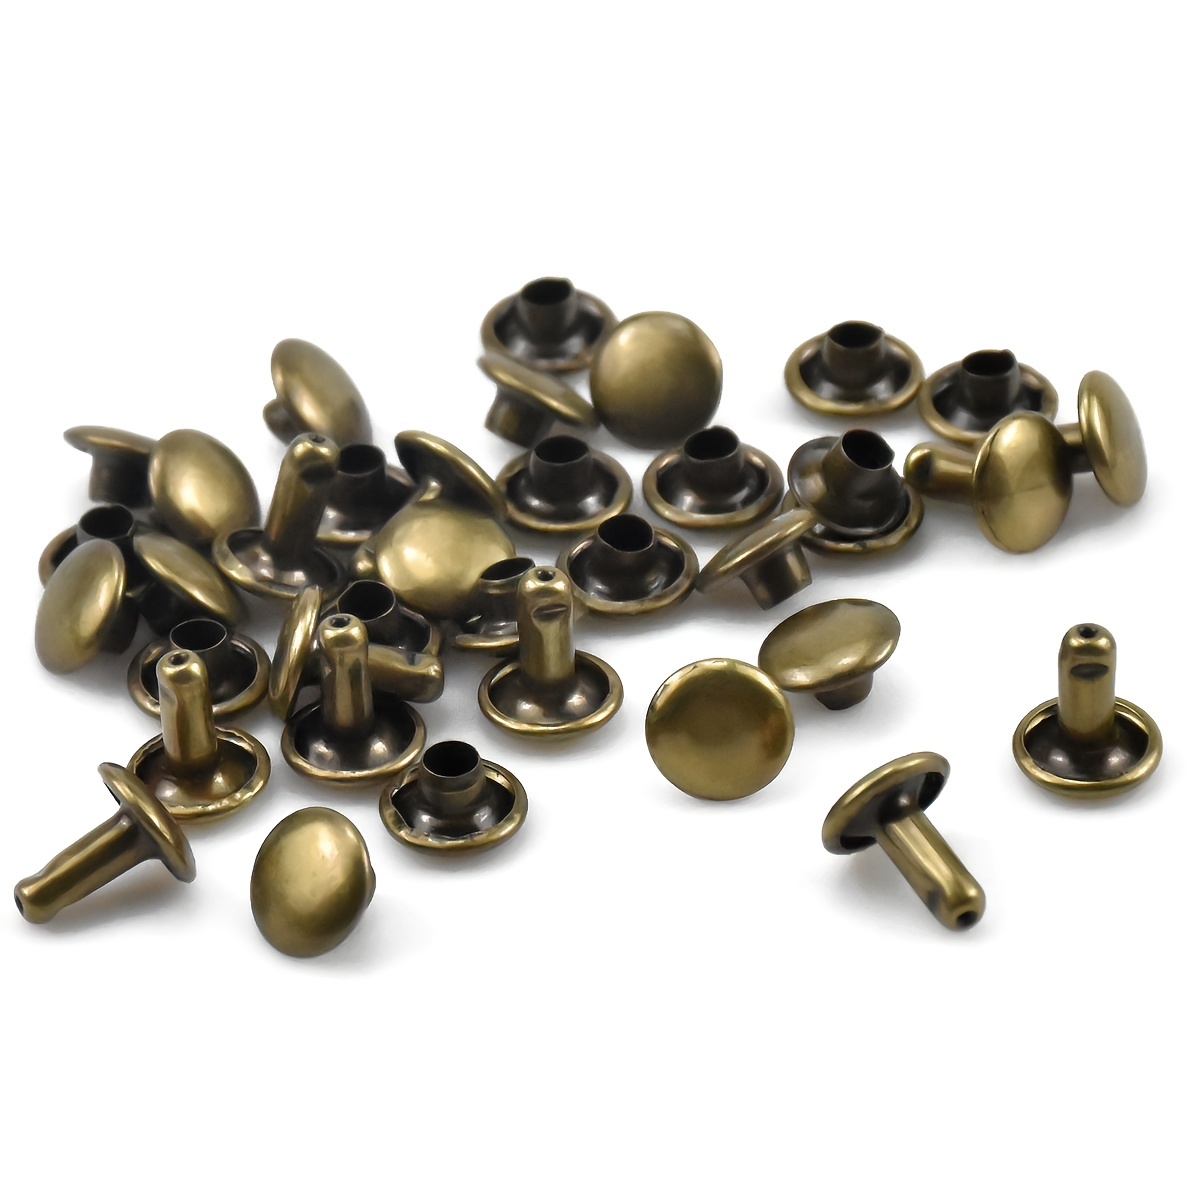 60 sets of High Quality Pure Brass Rivets, 6mm, 8mm Rivets, Brass Surf